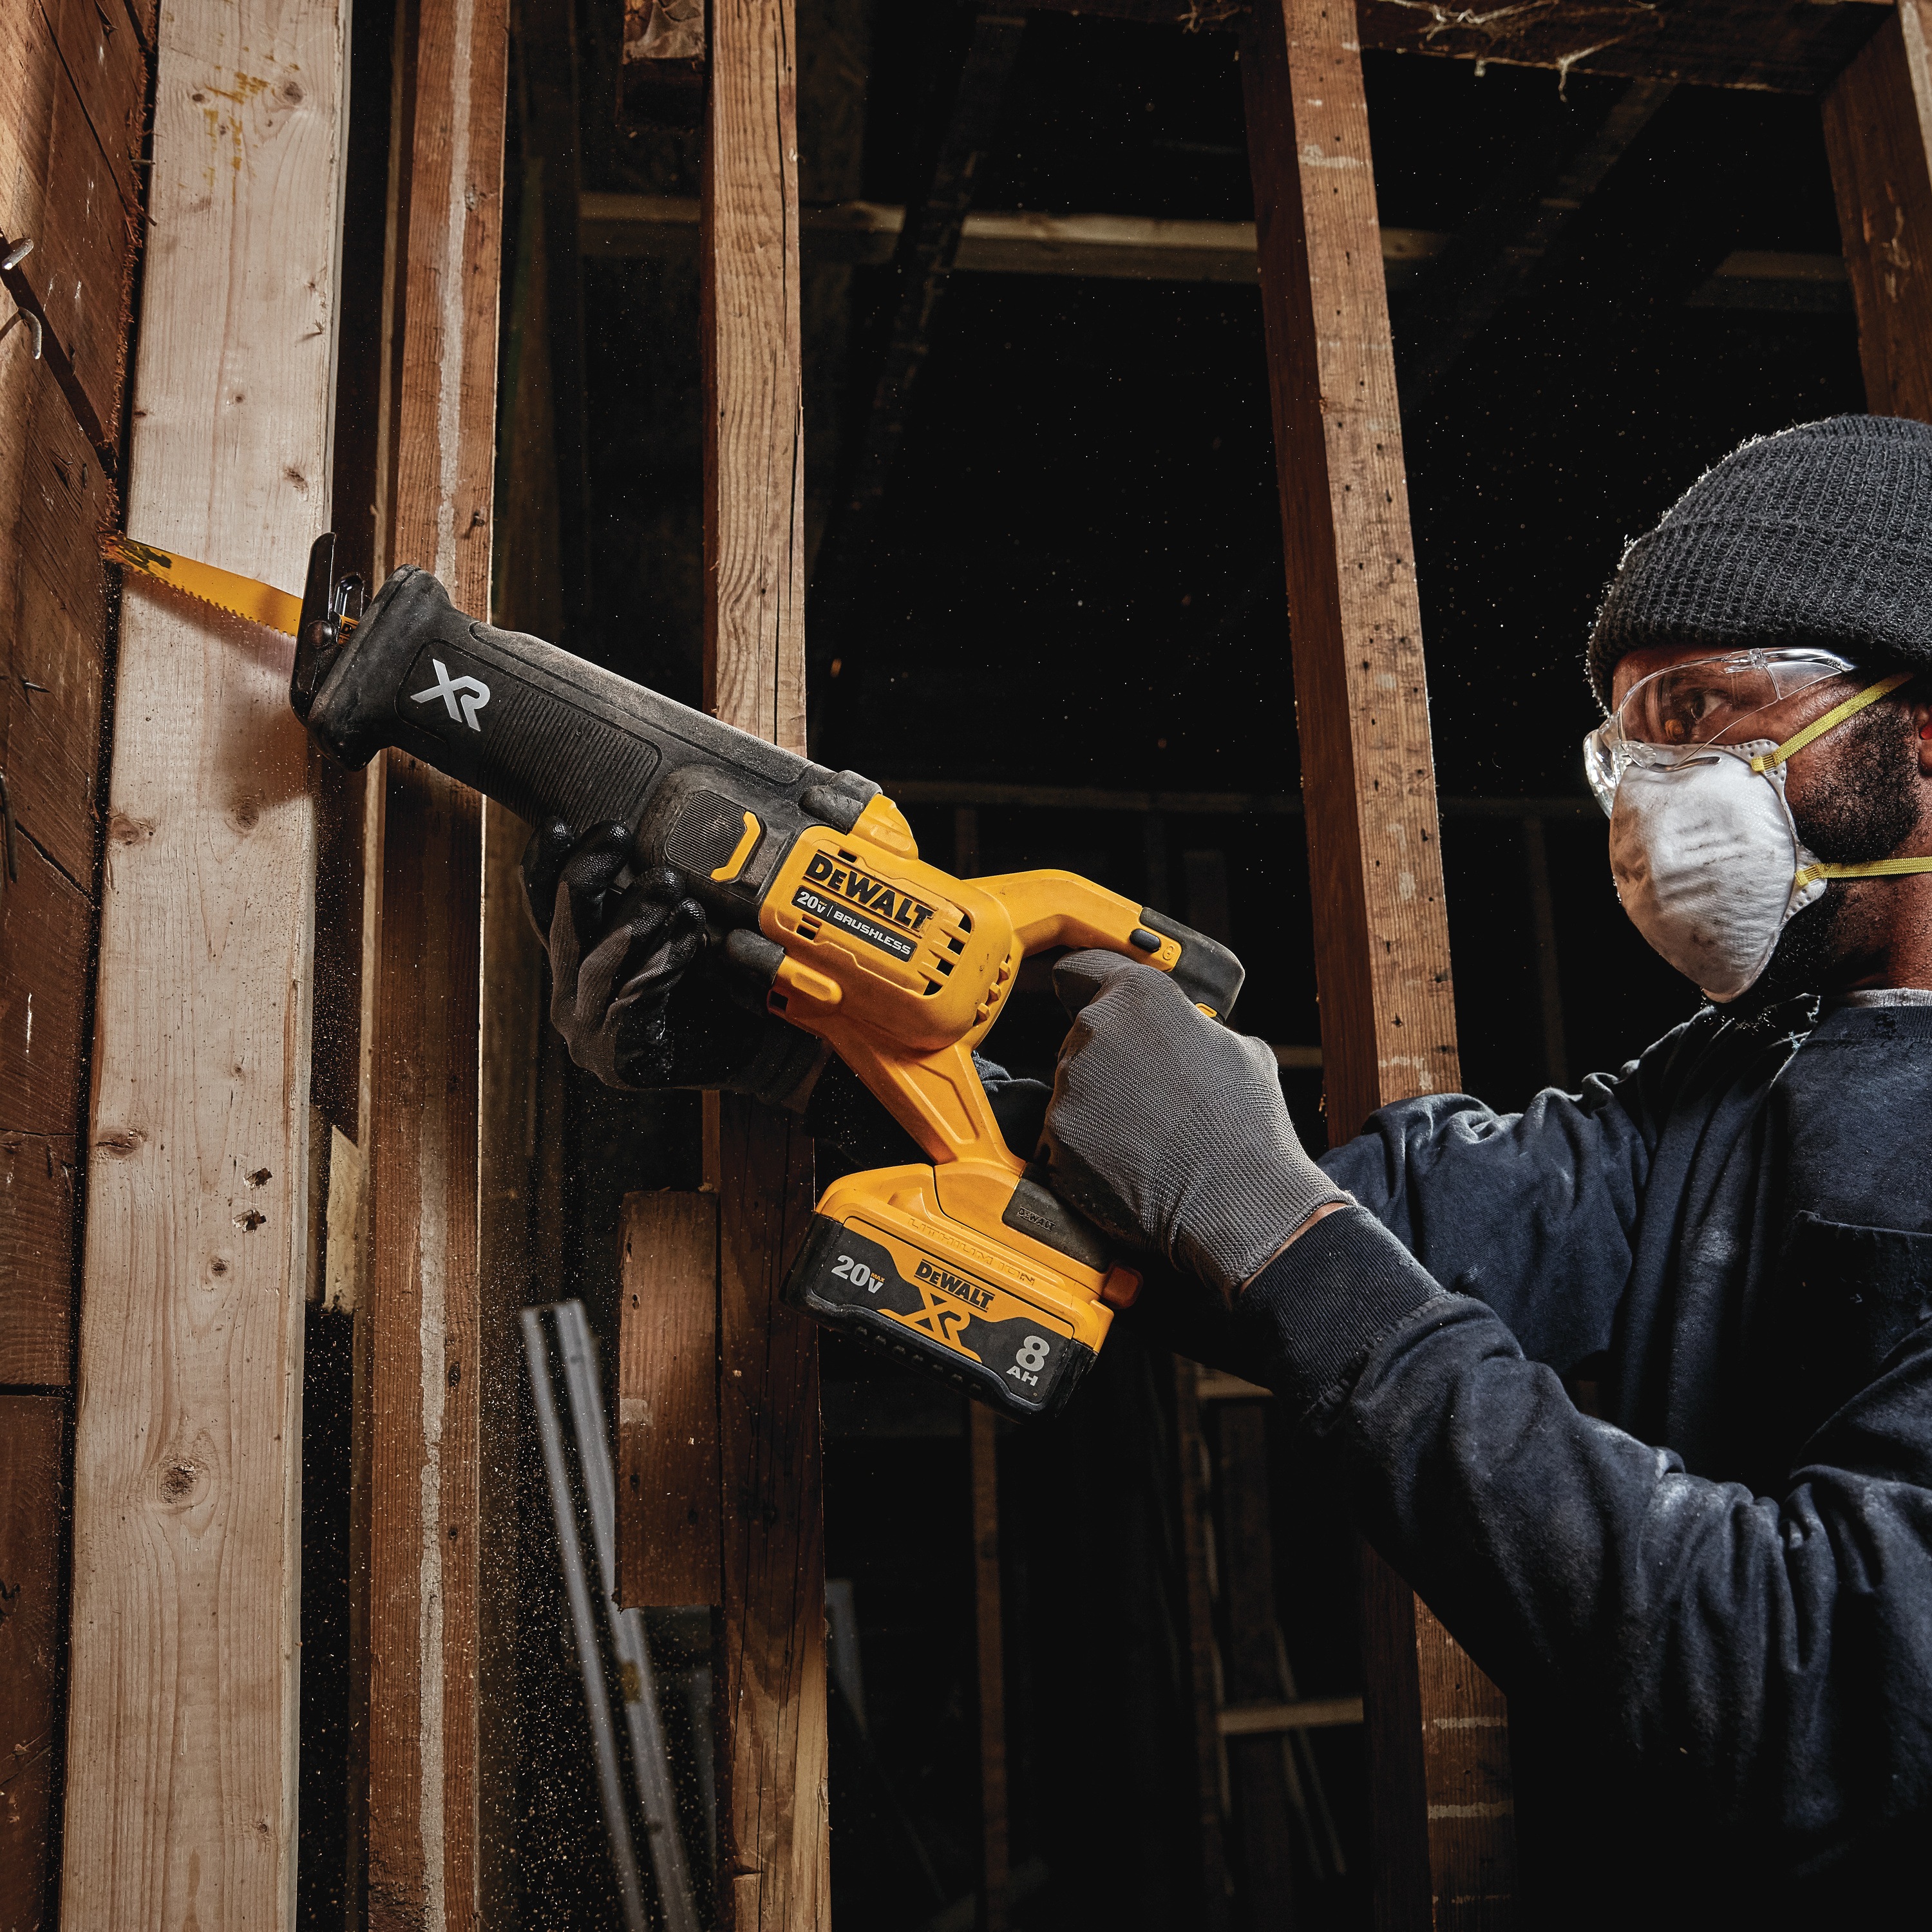 XR BRUSHLESS RECIPROCATING SAW WITH POWER DETECT being used by worker on shiplap